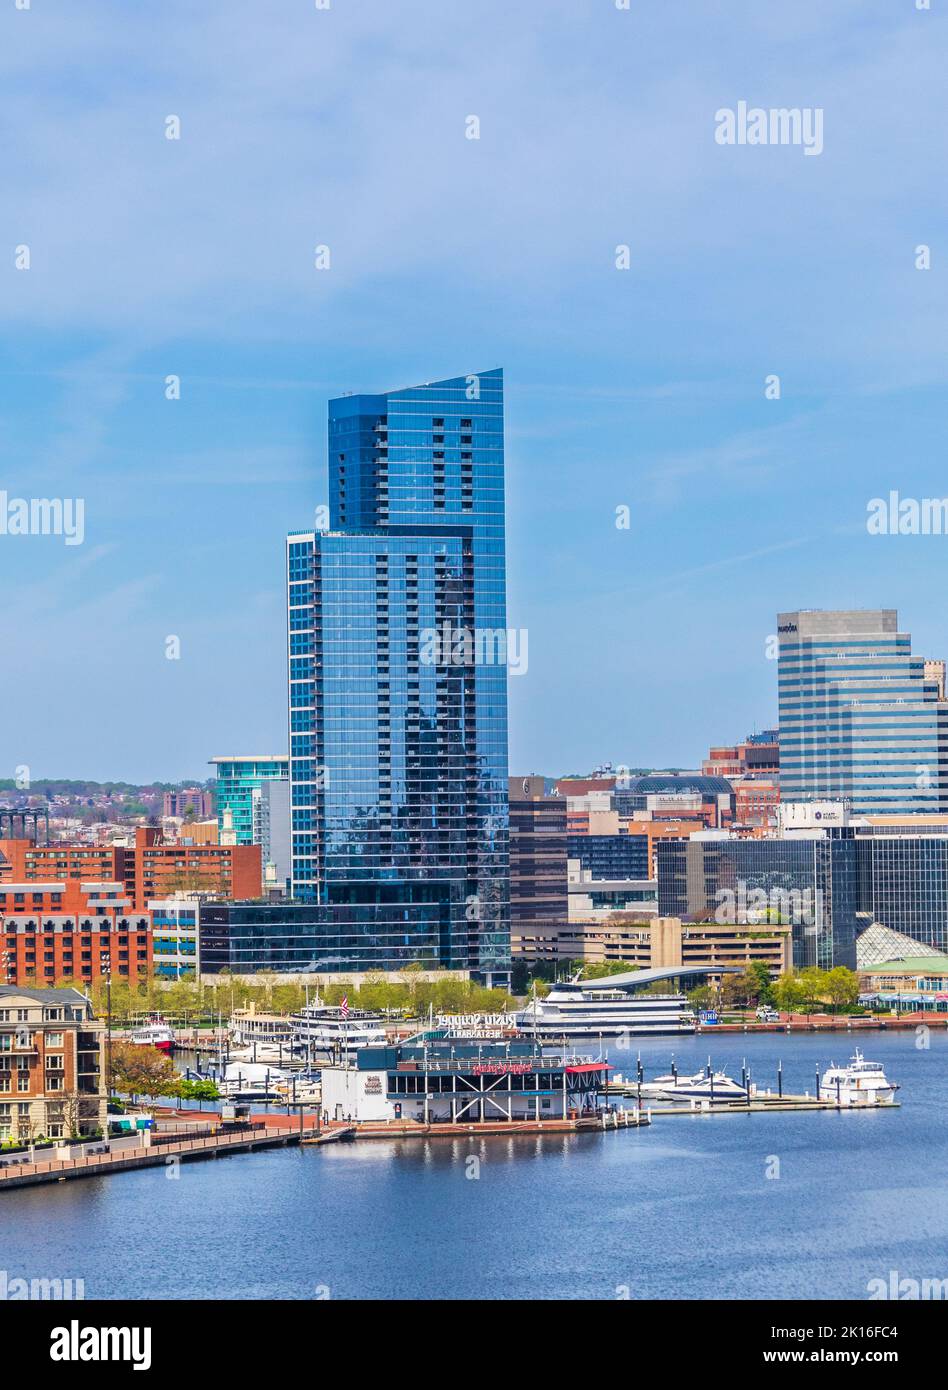 Baltimore Inner Harbor luxury high-rise living complexes with views of harbor including famous Rusty Scupper restaurant and Marina, Baltimore Maryland. Stock Photo